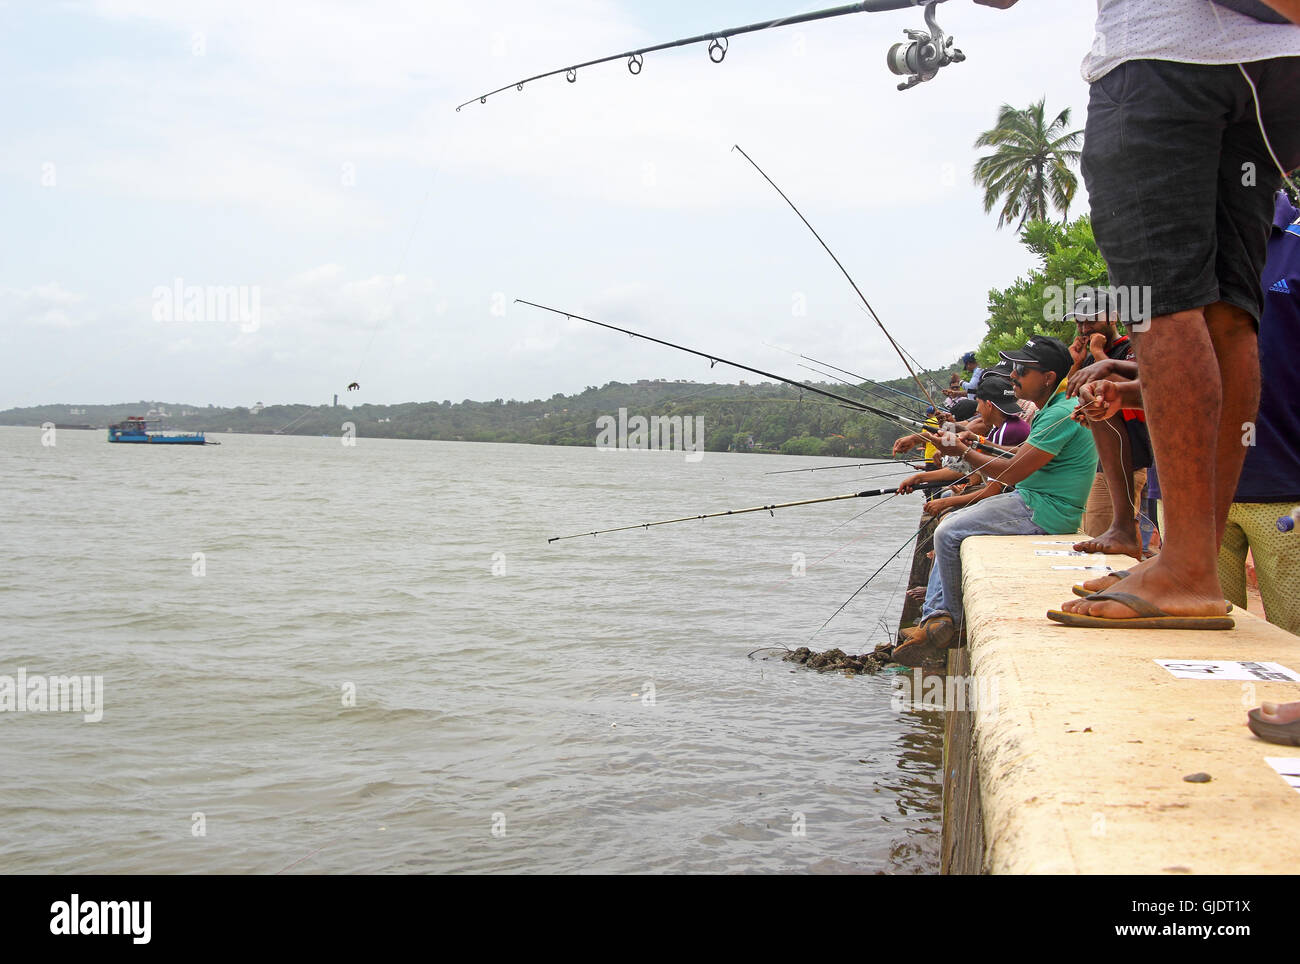 Goa, India. 15th August, 2016. Anglers participate in the 17th Annual All Goa Fishing Competition and Sea Food Festival at Ribandar in Goa, India. This is an annual event held on the banks of River Mondovi. MathewJoseK/Alamy Live News Stock Photo